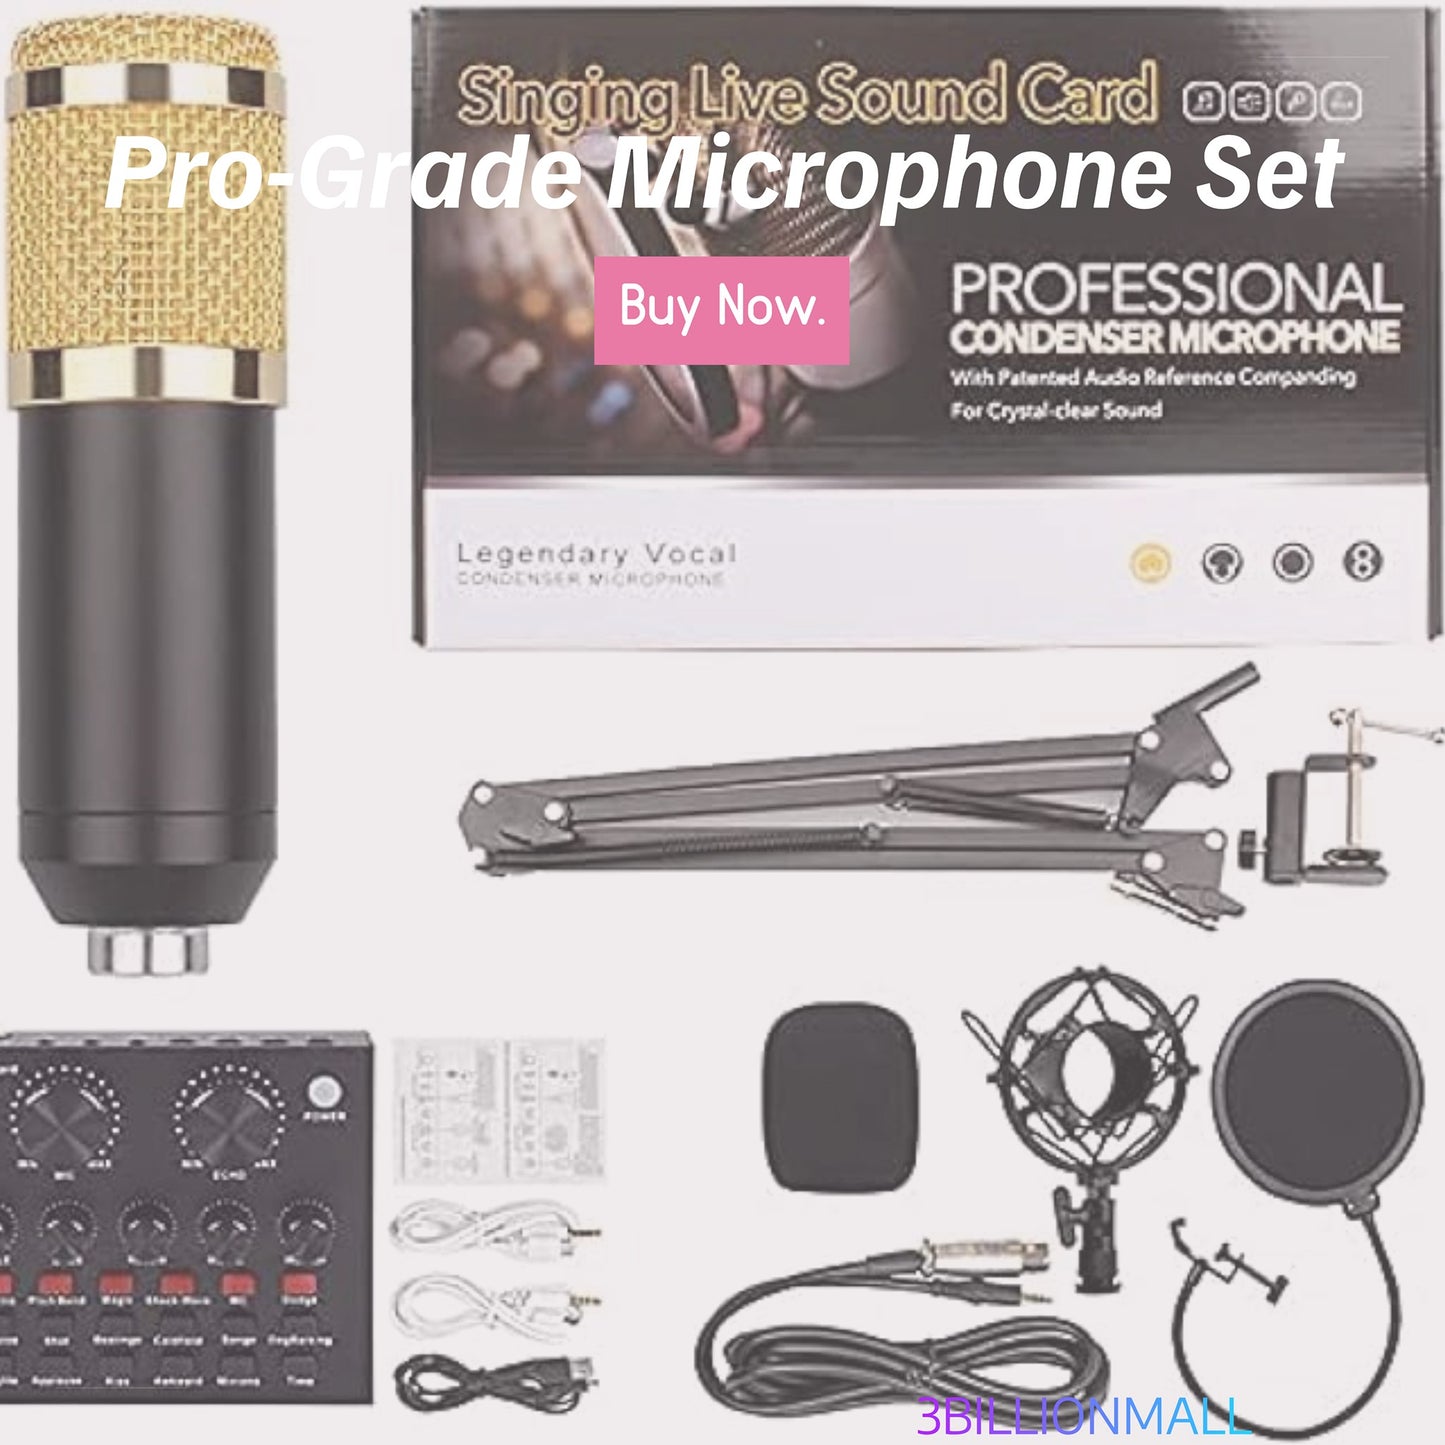 Bm-800 Pro Condenser Microphone Mic Studio Sound Recording With Stand With Soundv Card